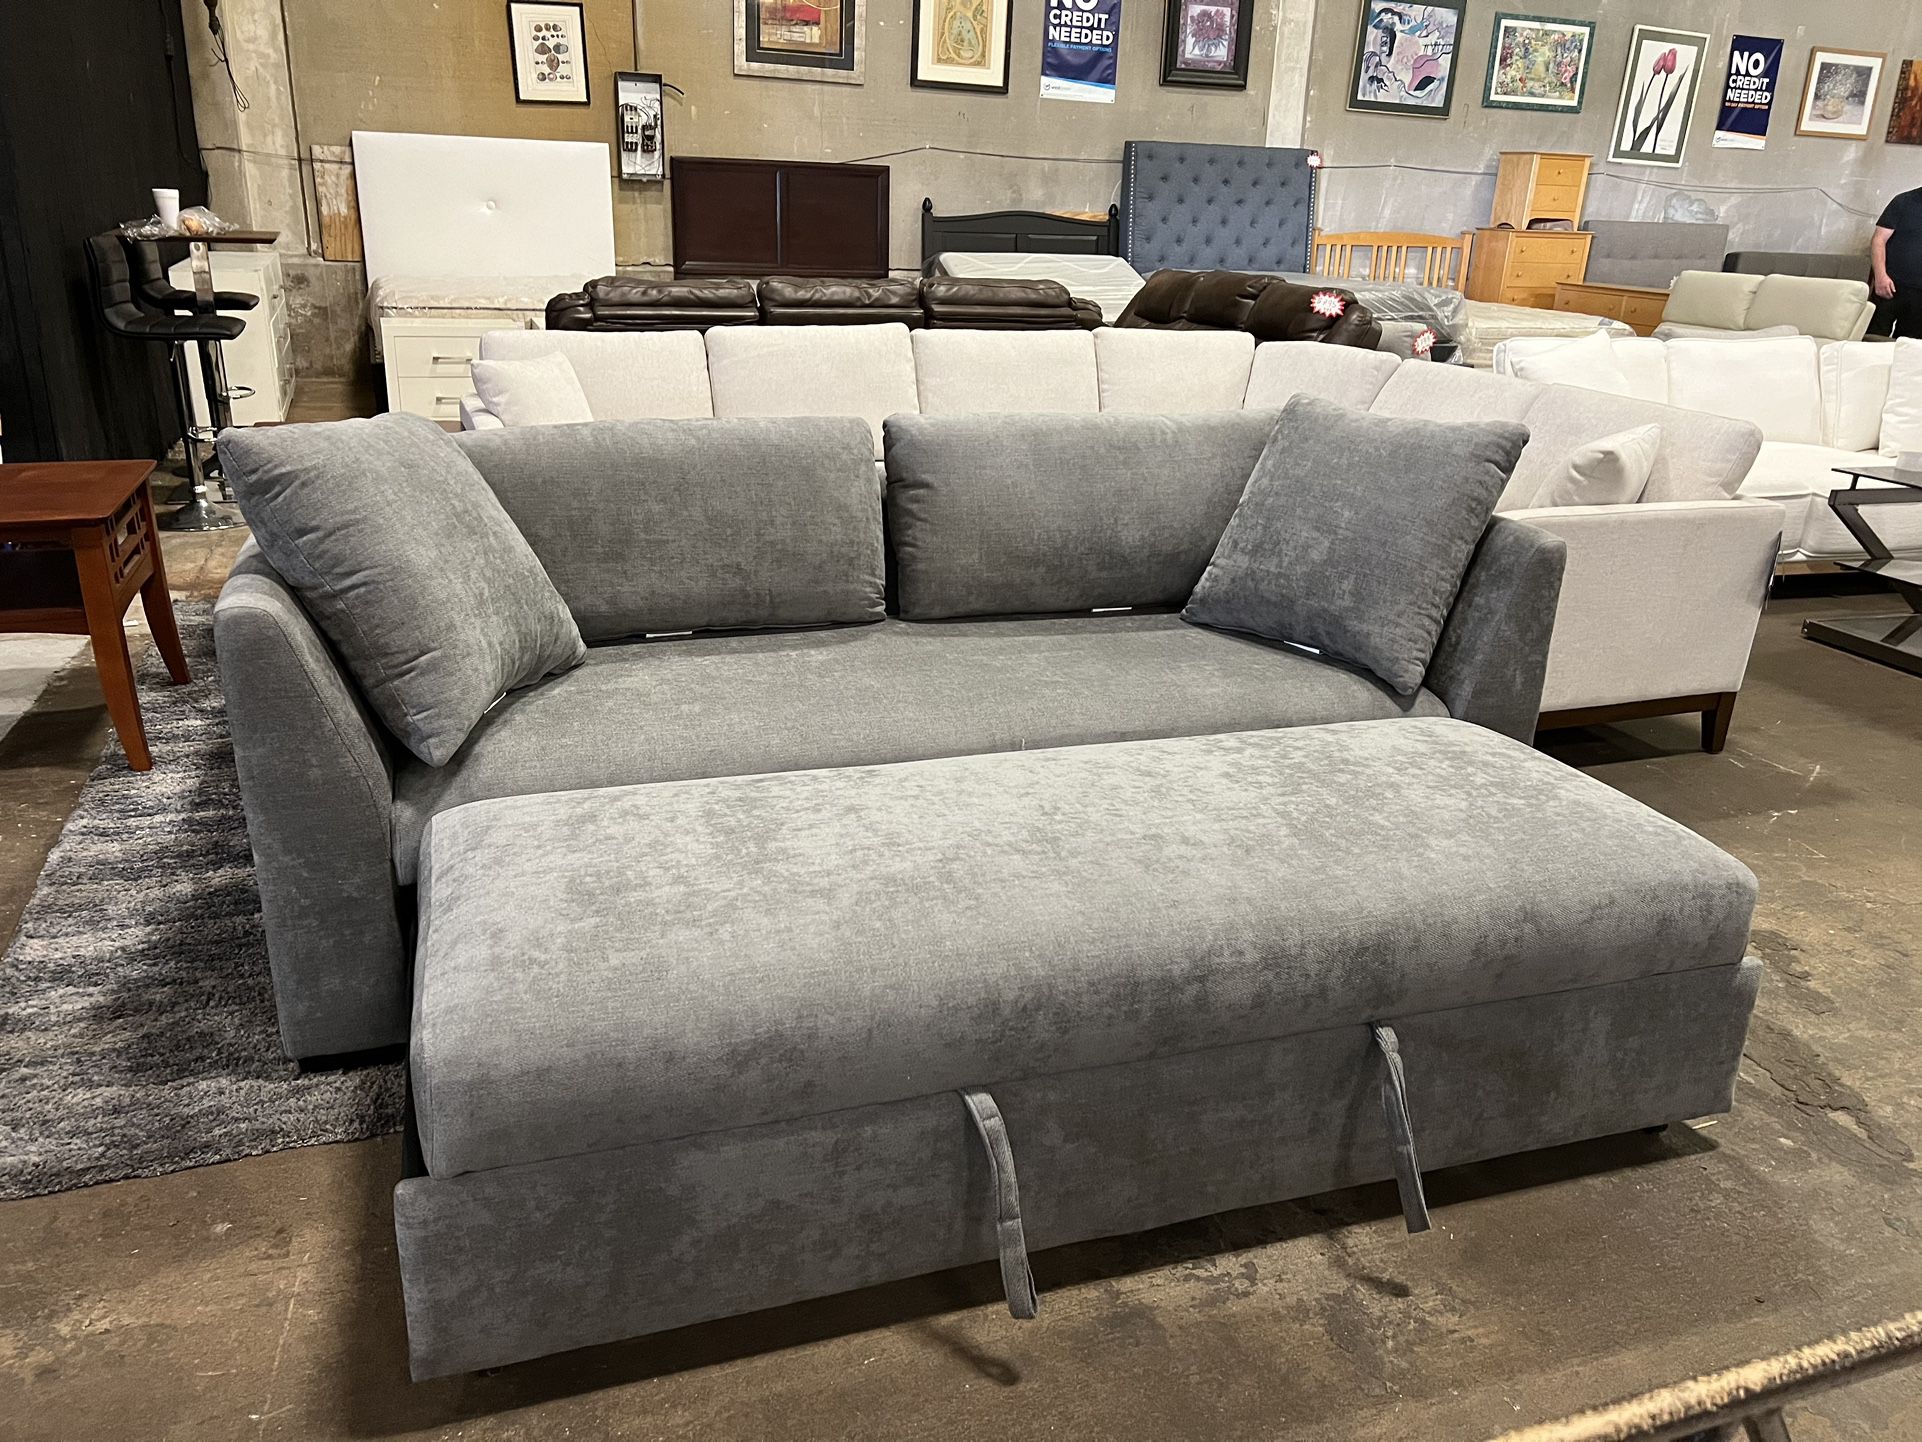 Sleeper Sofa In Dark Gray Color. Scratch & Dent. Delivery Available. 90 Days Same As Cash Financing 